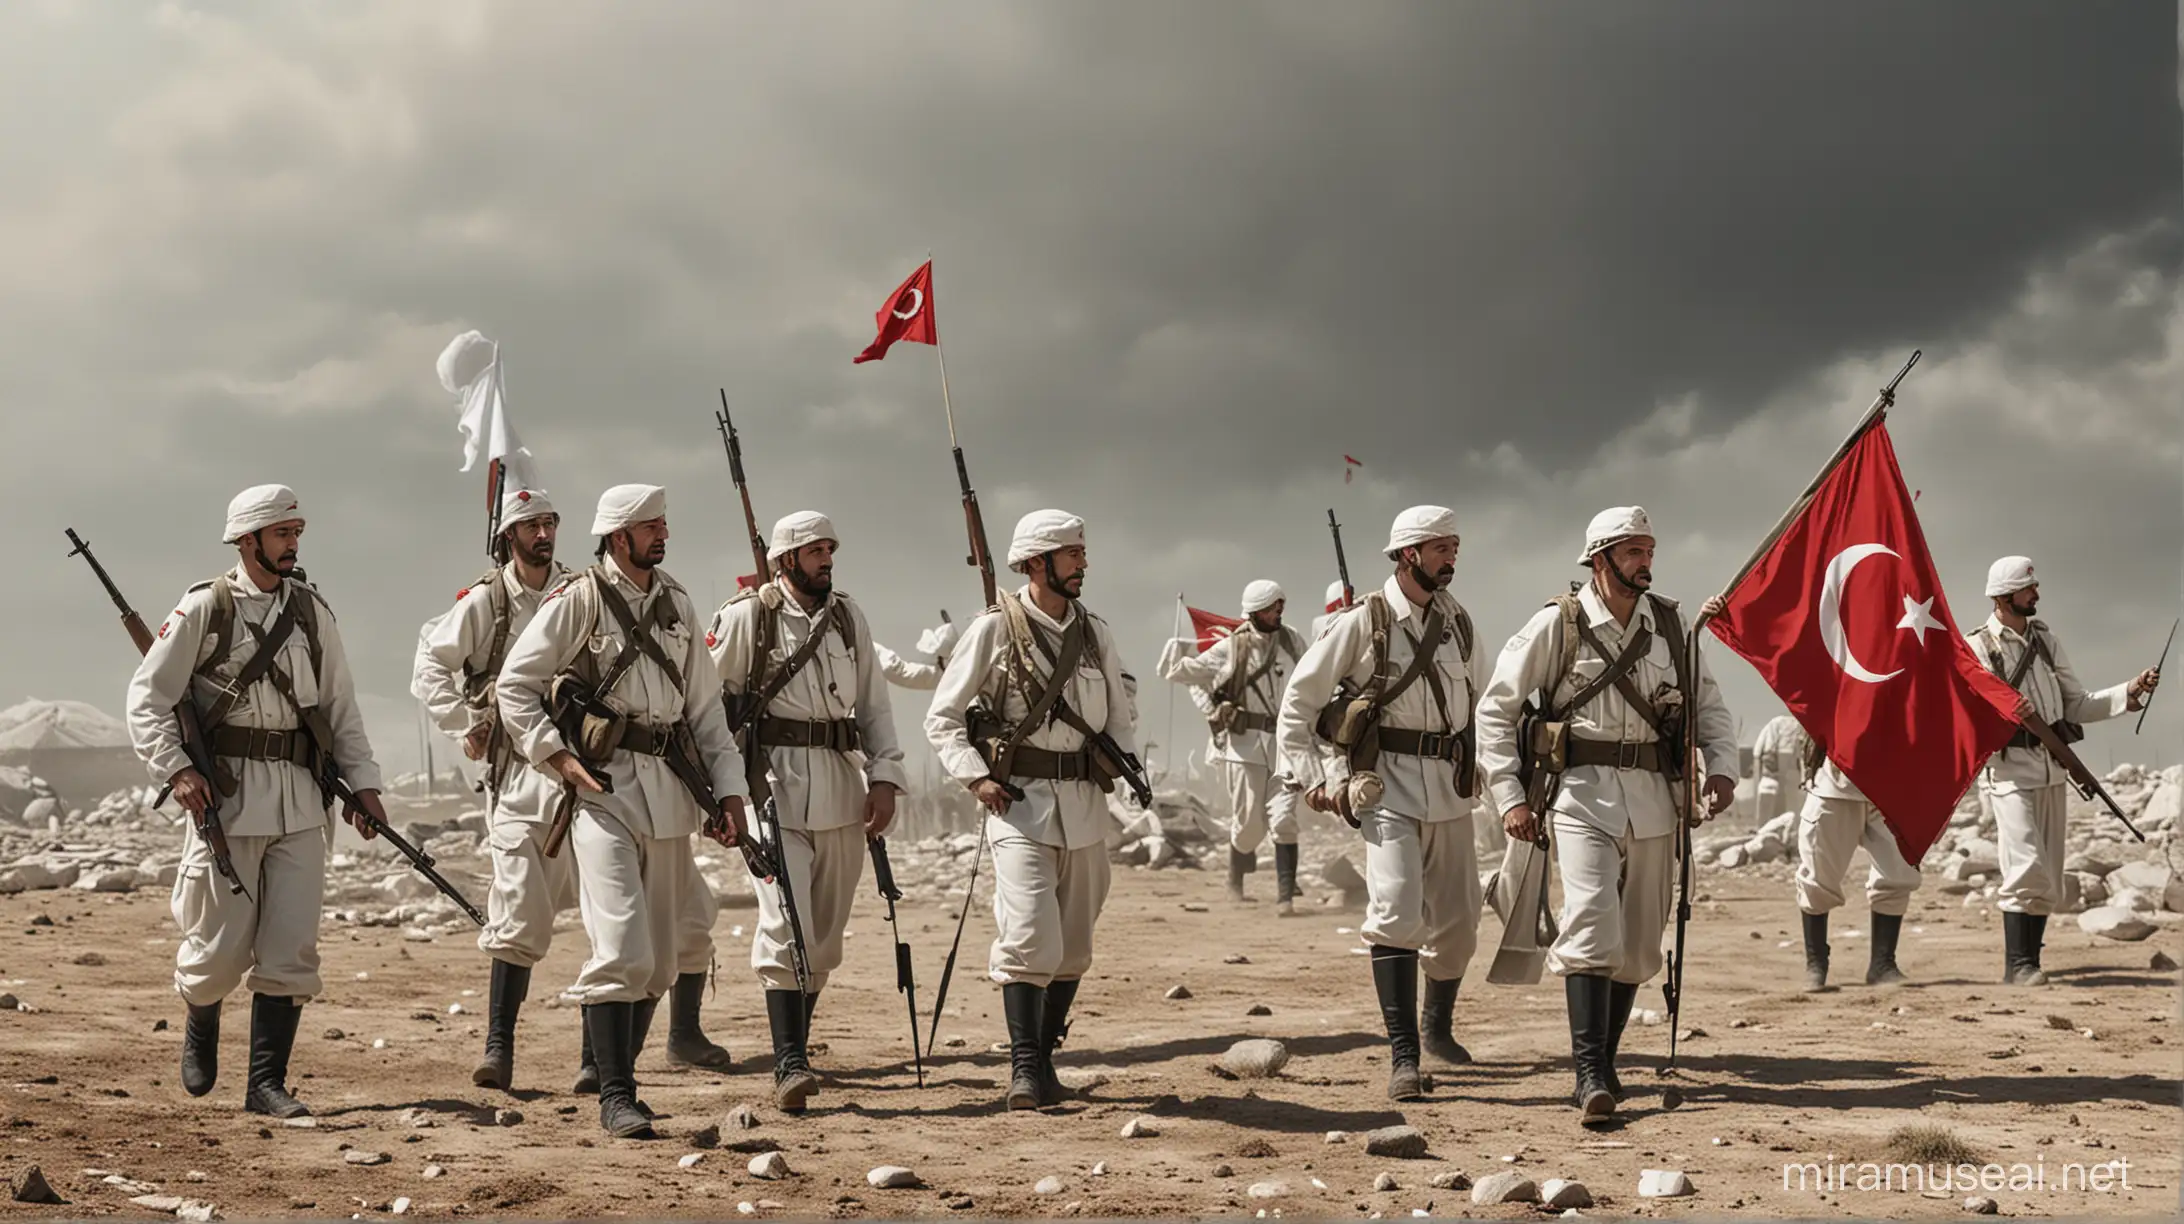 Turkish soldiers, dressed as soldiers, Turkish soldiers surrend. One of them carry a white flag, 21st century, hyperrealist, cinematographic